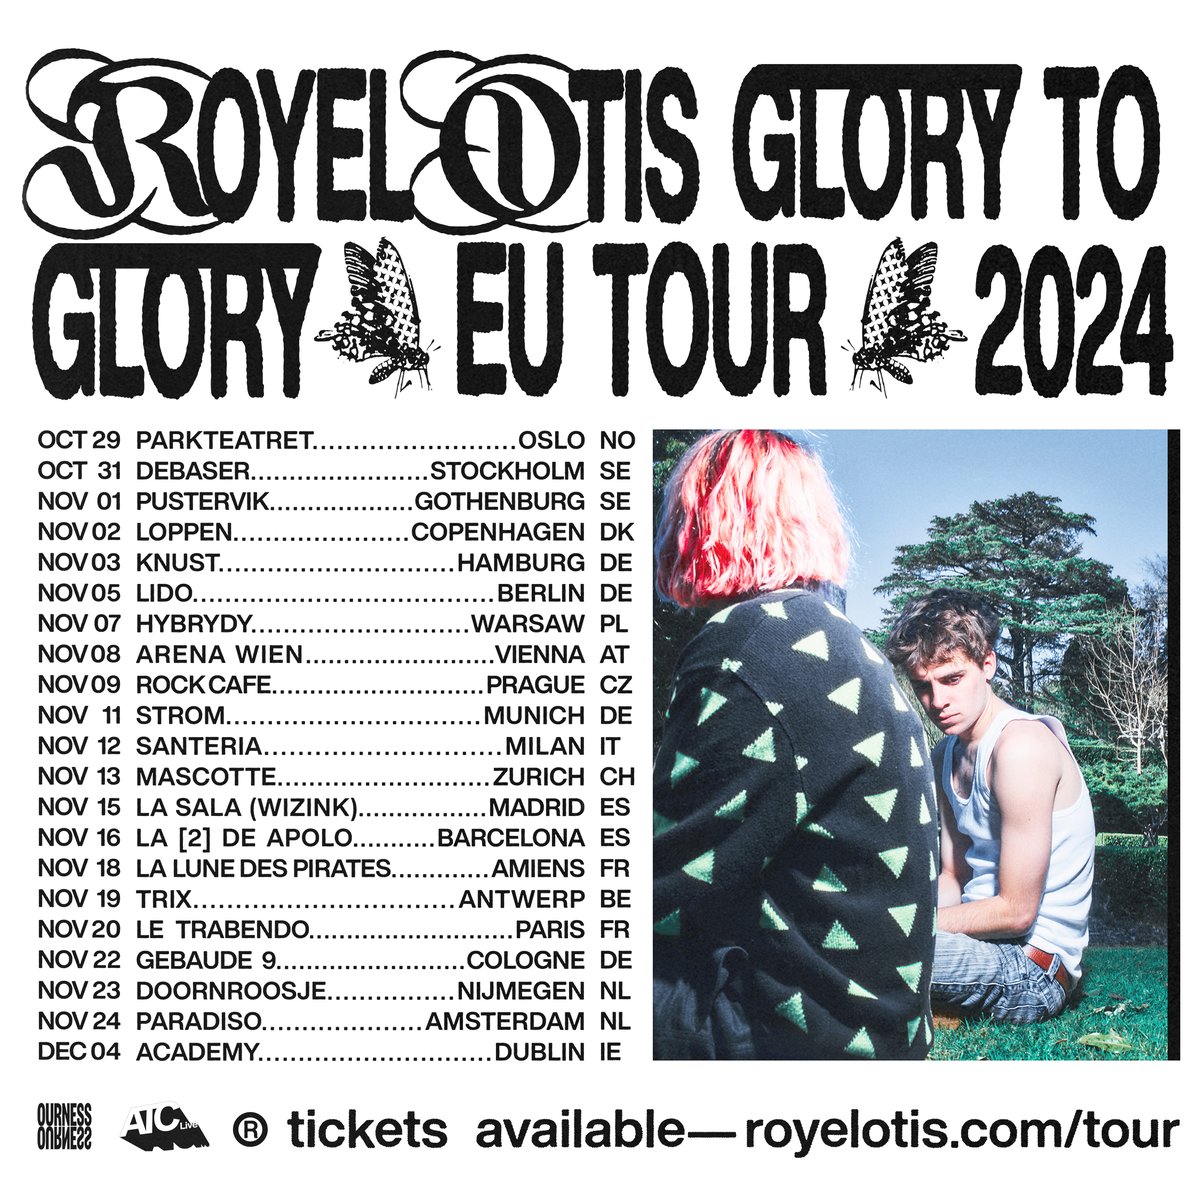 Europe & UK, we would never leave you. Glory to Glory tour now announced! Sign up for pre-sale access via the link below laylo.com/royelotis/ZEdpP Pre-sale: Wednesday, May 8th at 10am BST / 11am CEST General on sale: Friday, May 10th at 10am GMT / 11am CEST